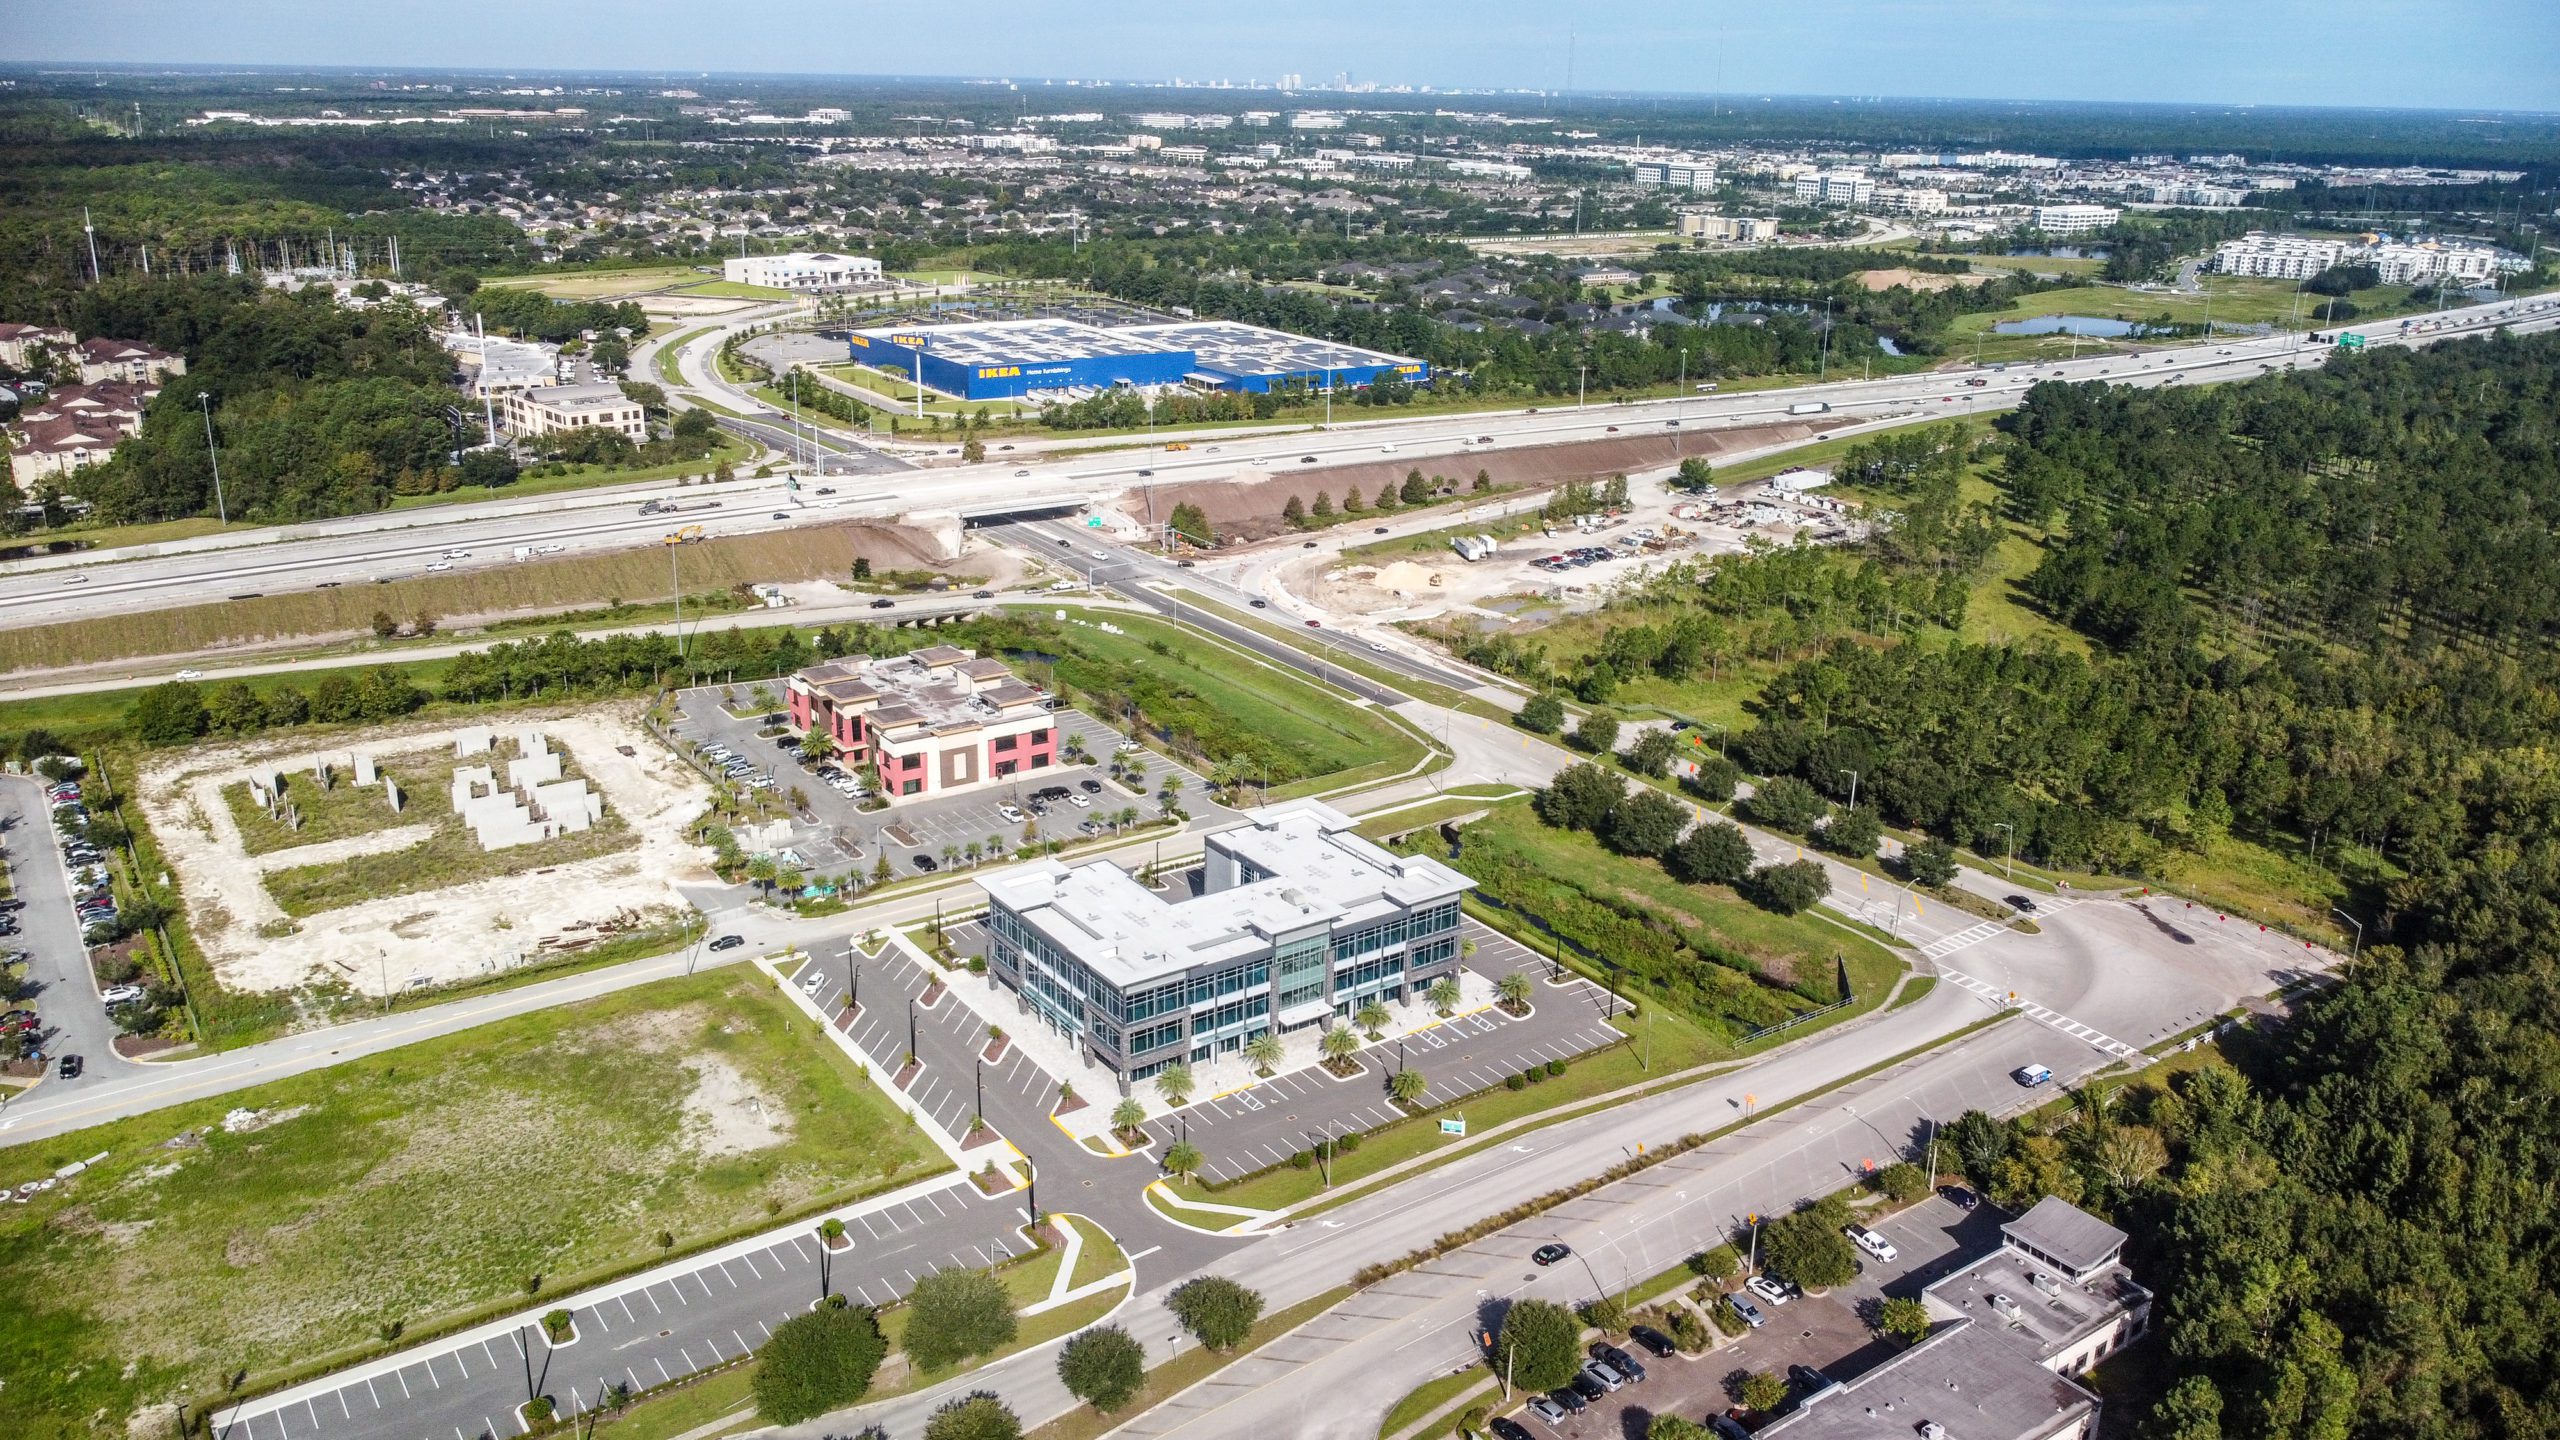 An aerial view of office buildings and surrounding highways.